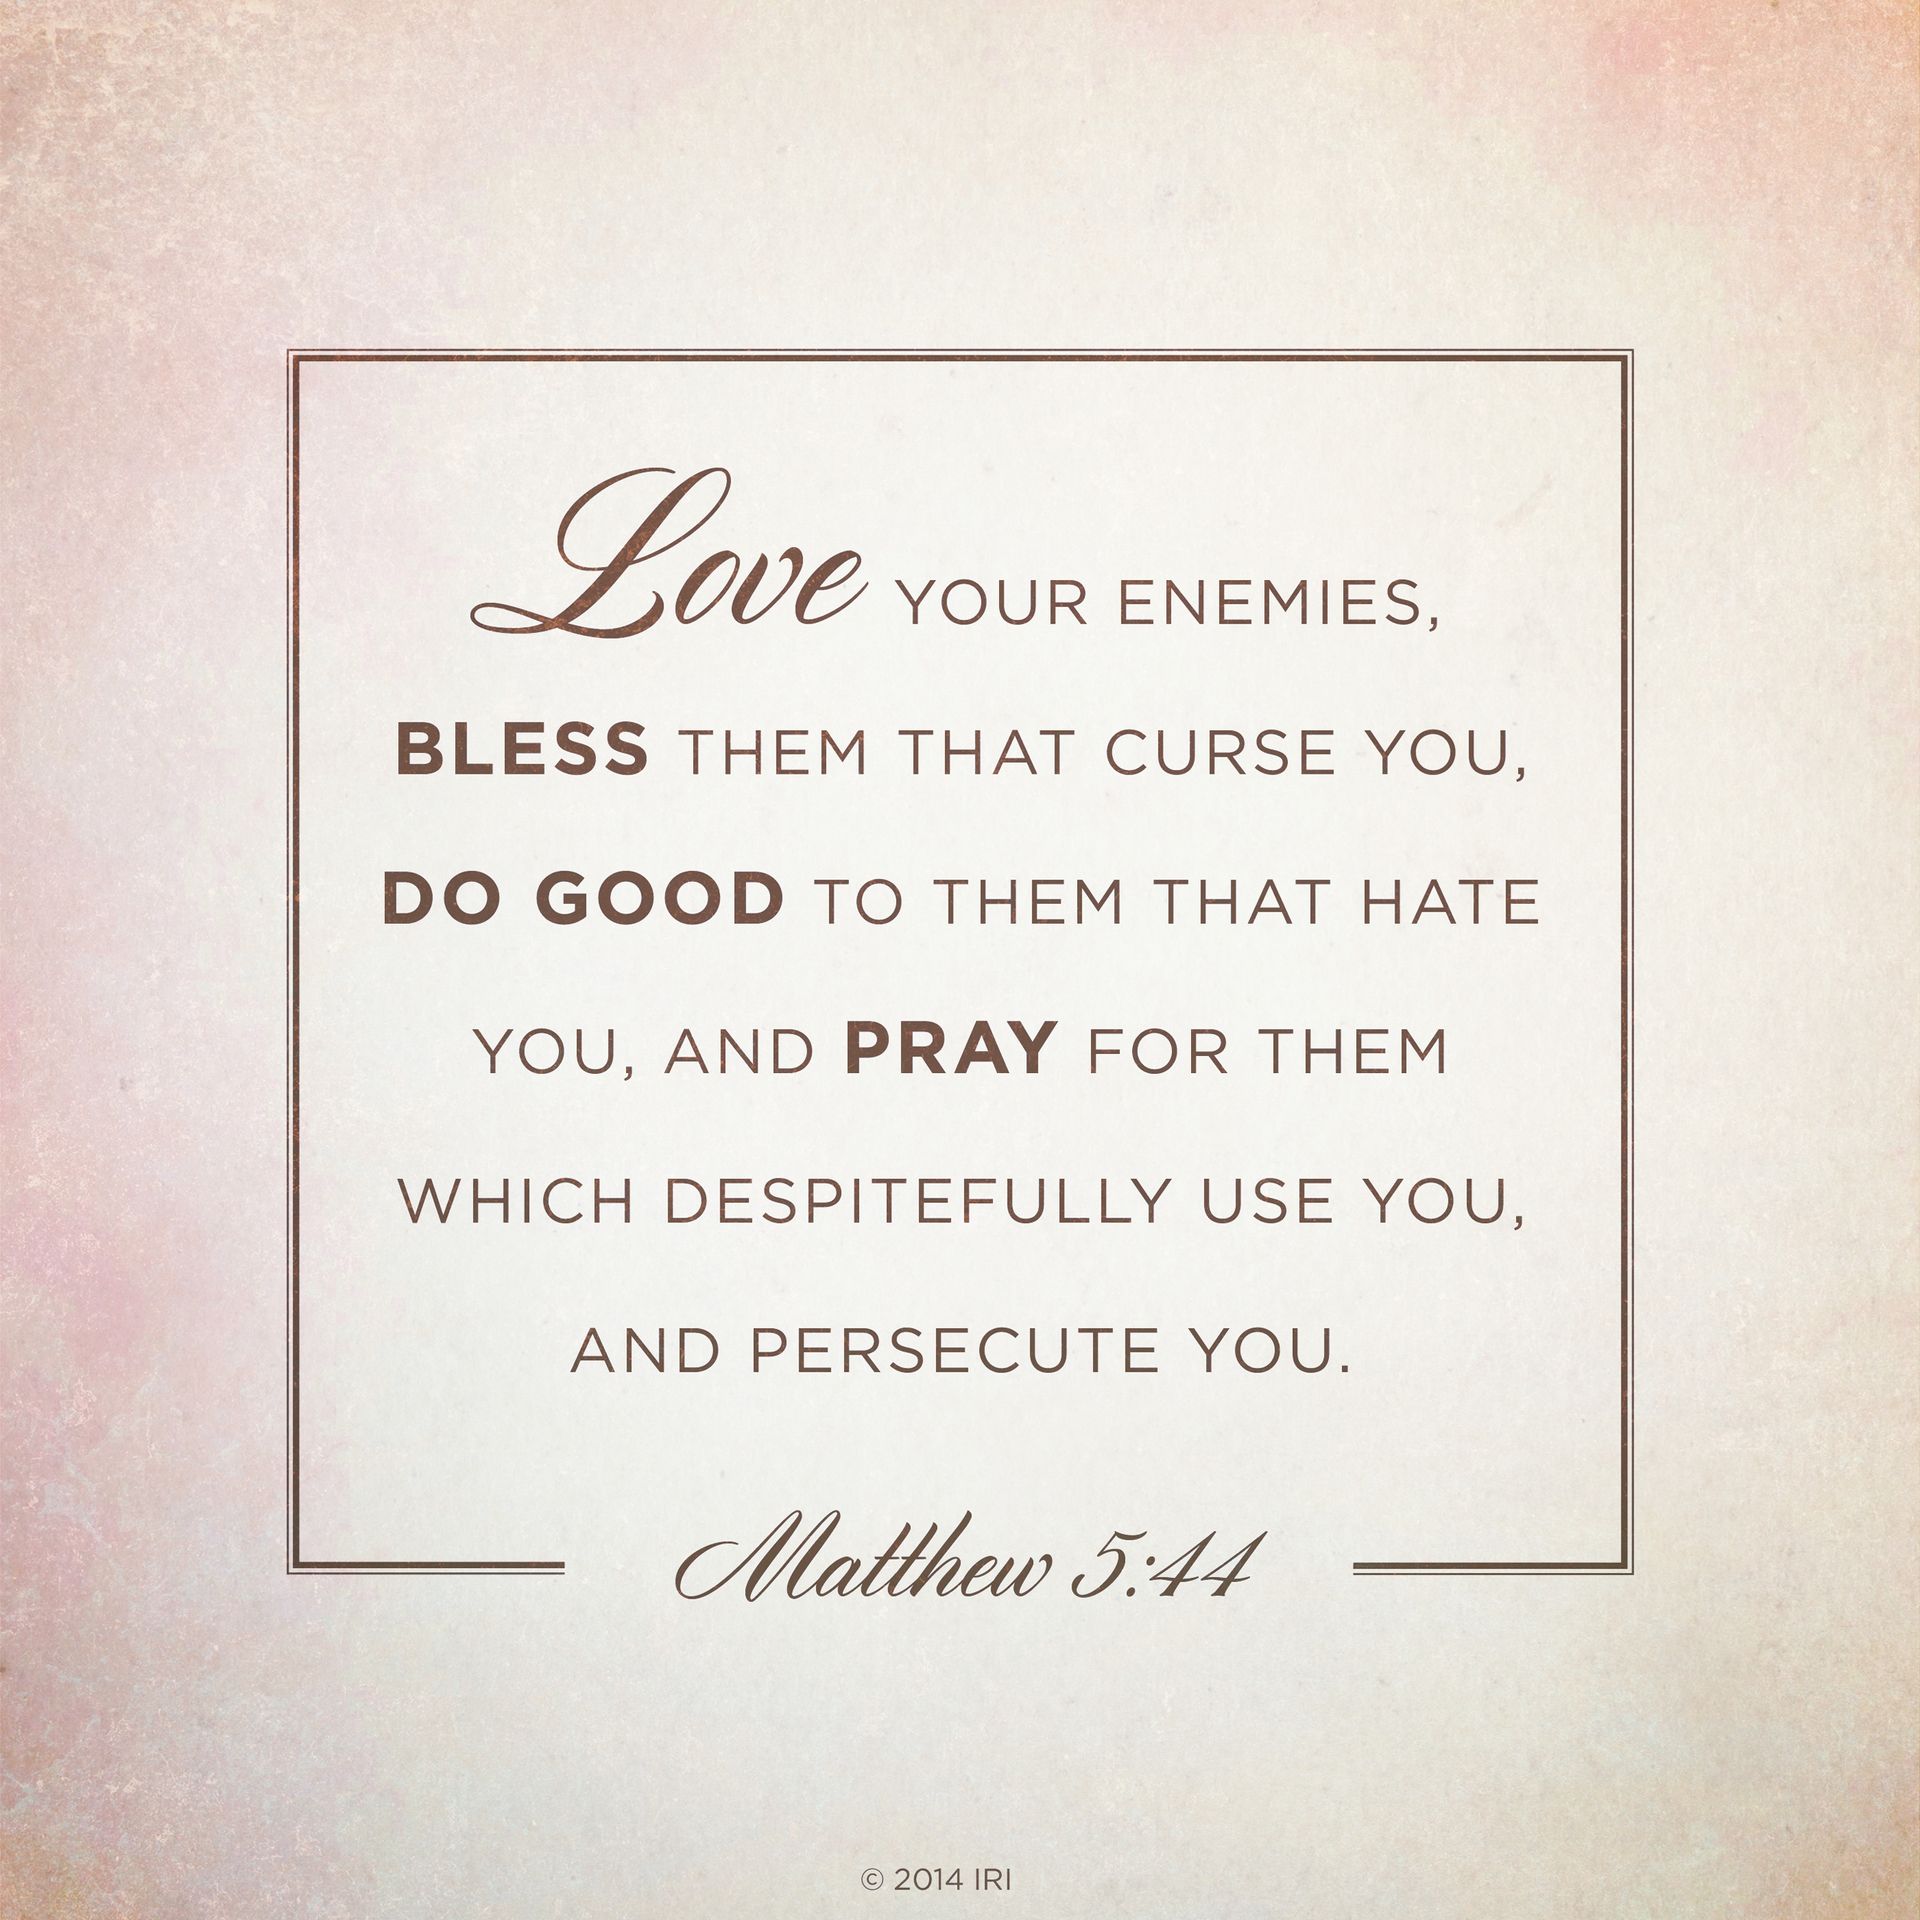 “Love your enemies, bless them that curse you, do good to them that hate you, and pray for them which despitefully use you, and persecute you.”—Matthew 5:44